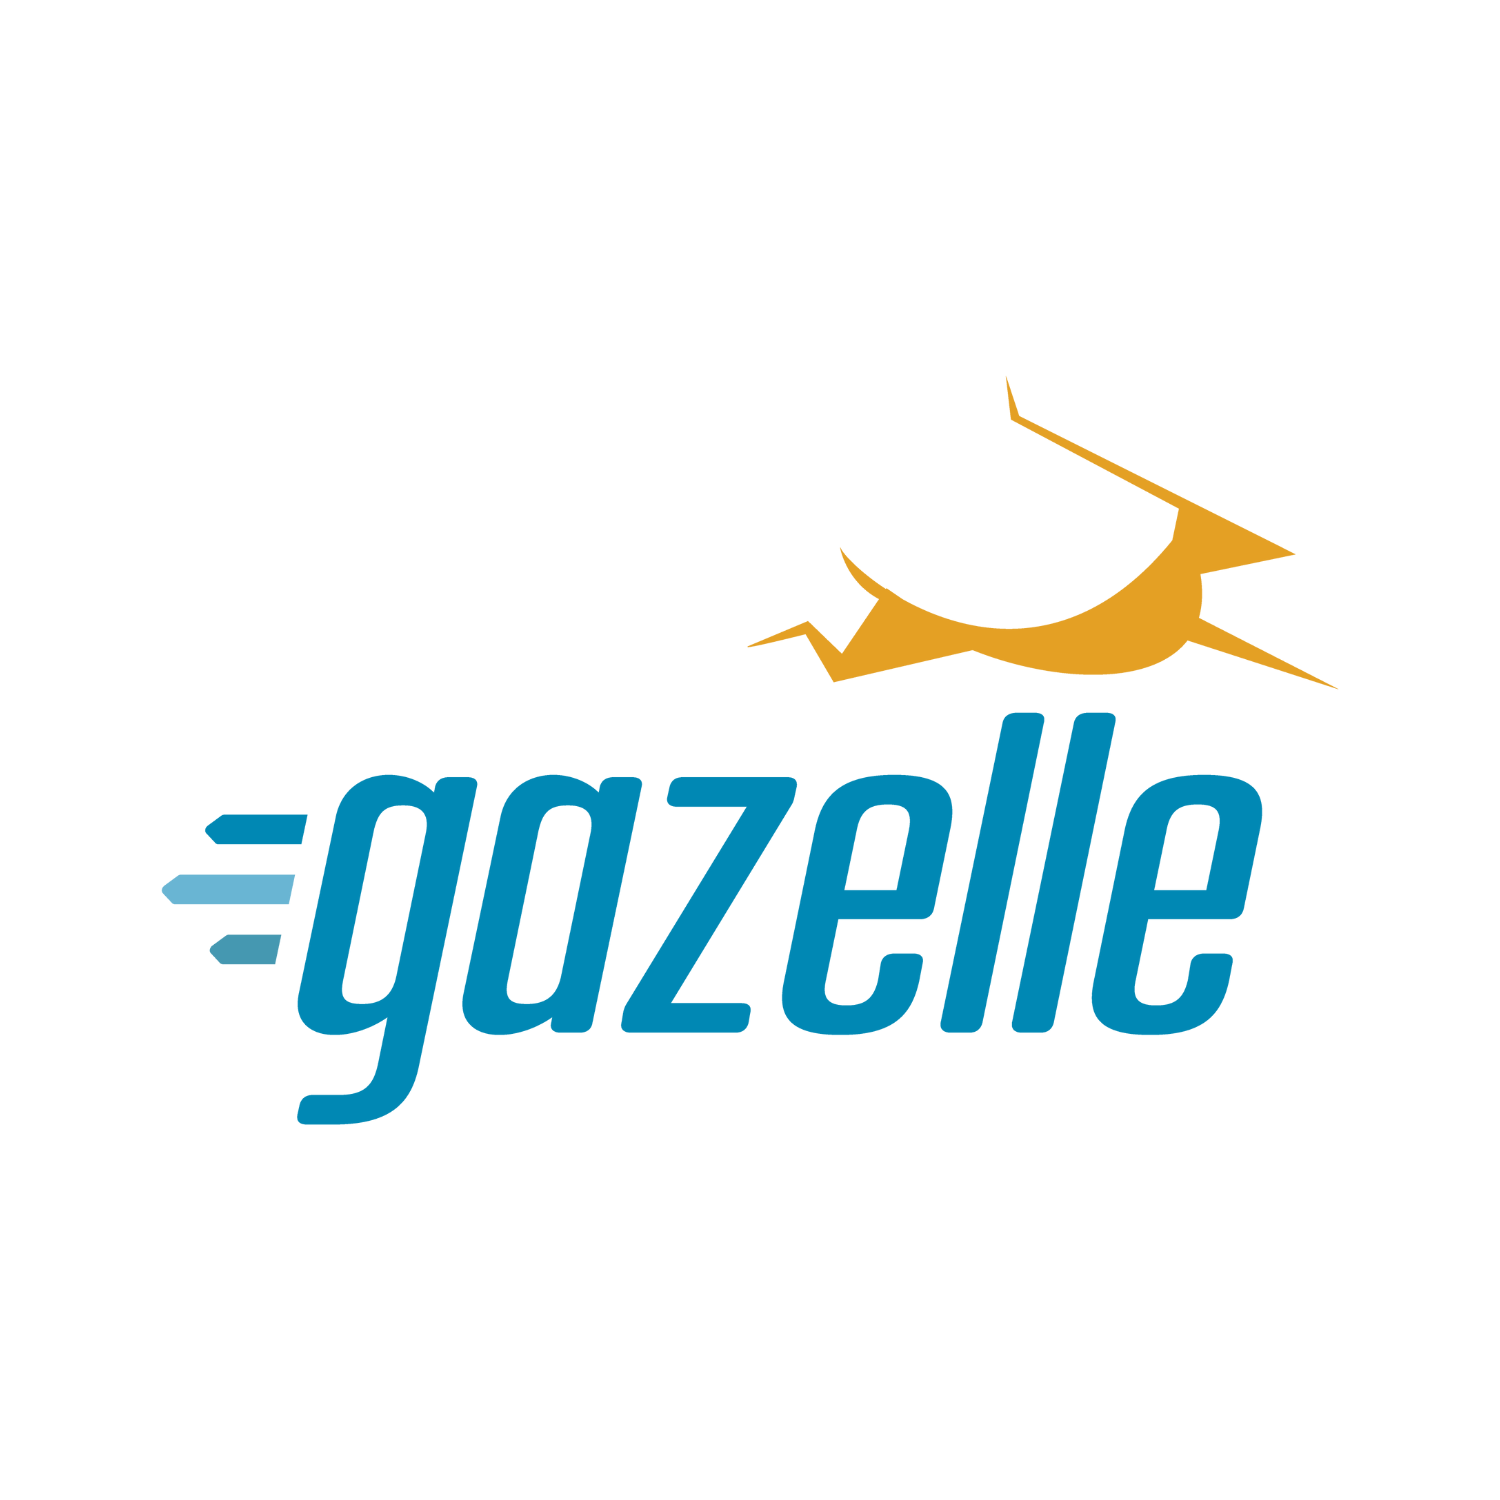 Gazelle - orGAniZing accELaration for high-potentiaL innovativE SMEs